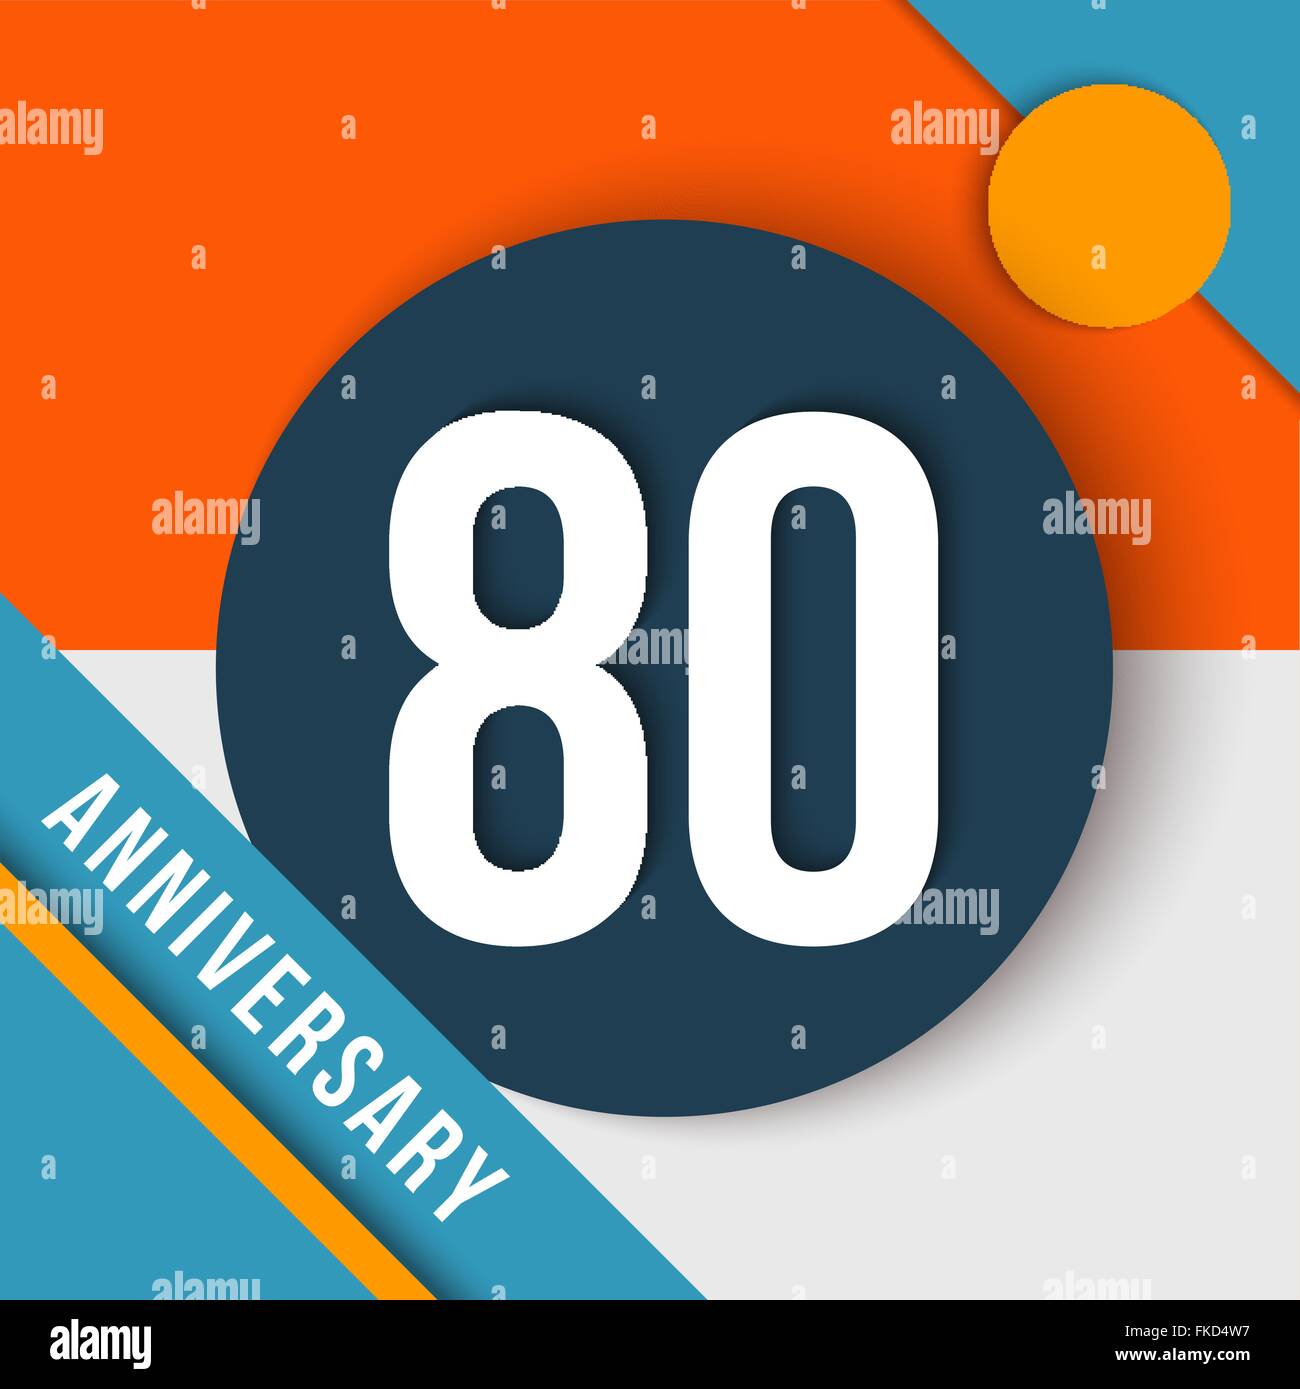 80 eighty year anniversary modern concept with number, text label and abstract shapes in material design style. EPS10 vector. Stock Vector